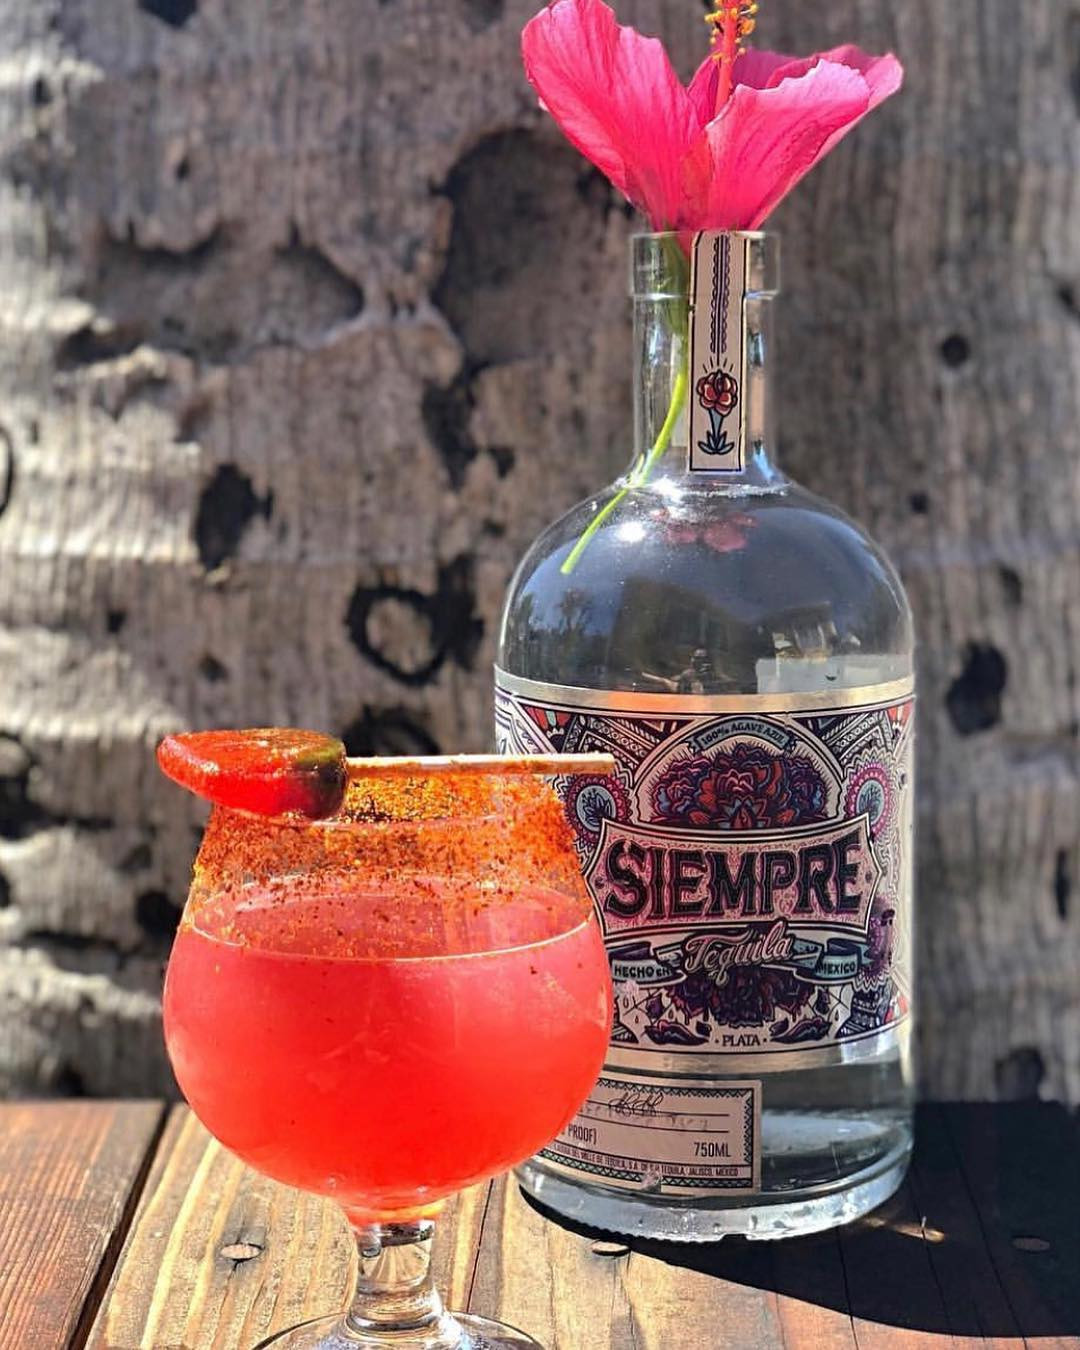 29 Awesome Vidrios San Miguel Recycled Glass Vase 2024 free download vidrios san miguel recycled glass vase of calimixers pictures jestpic com pertaining to siempretequila calimixers joins the line up for the margaritas y mas festival san diego 18 saturday se